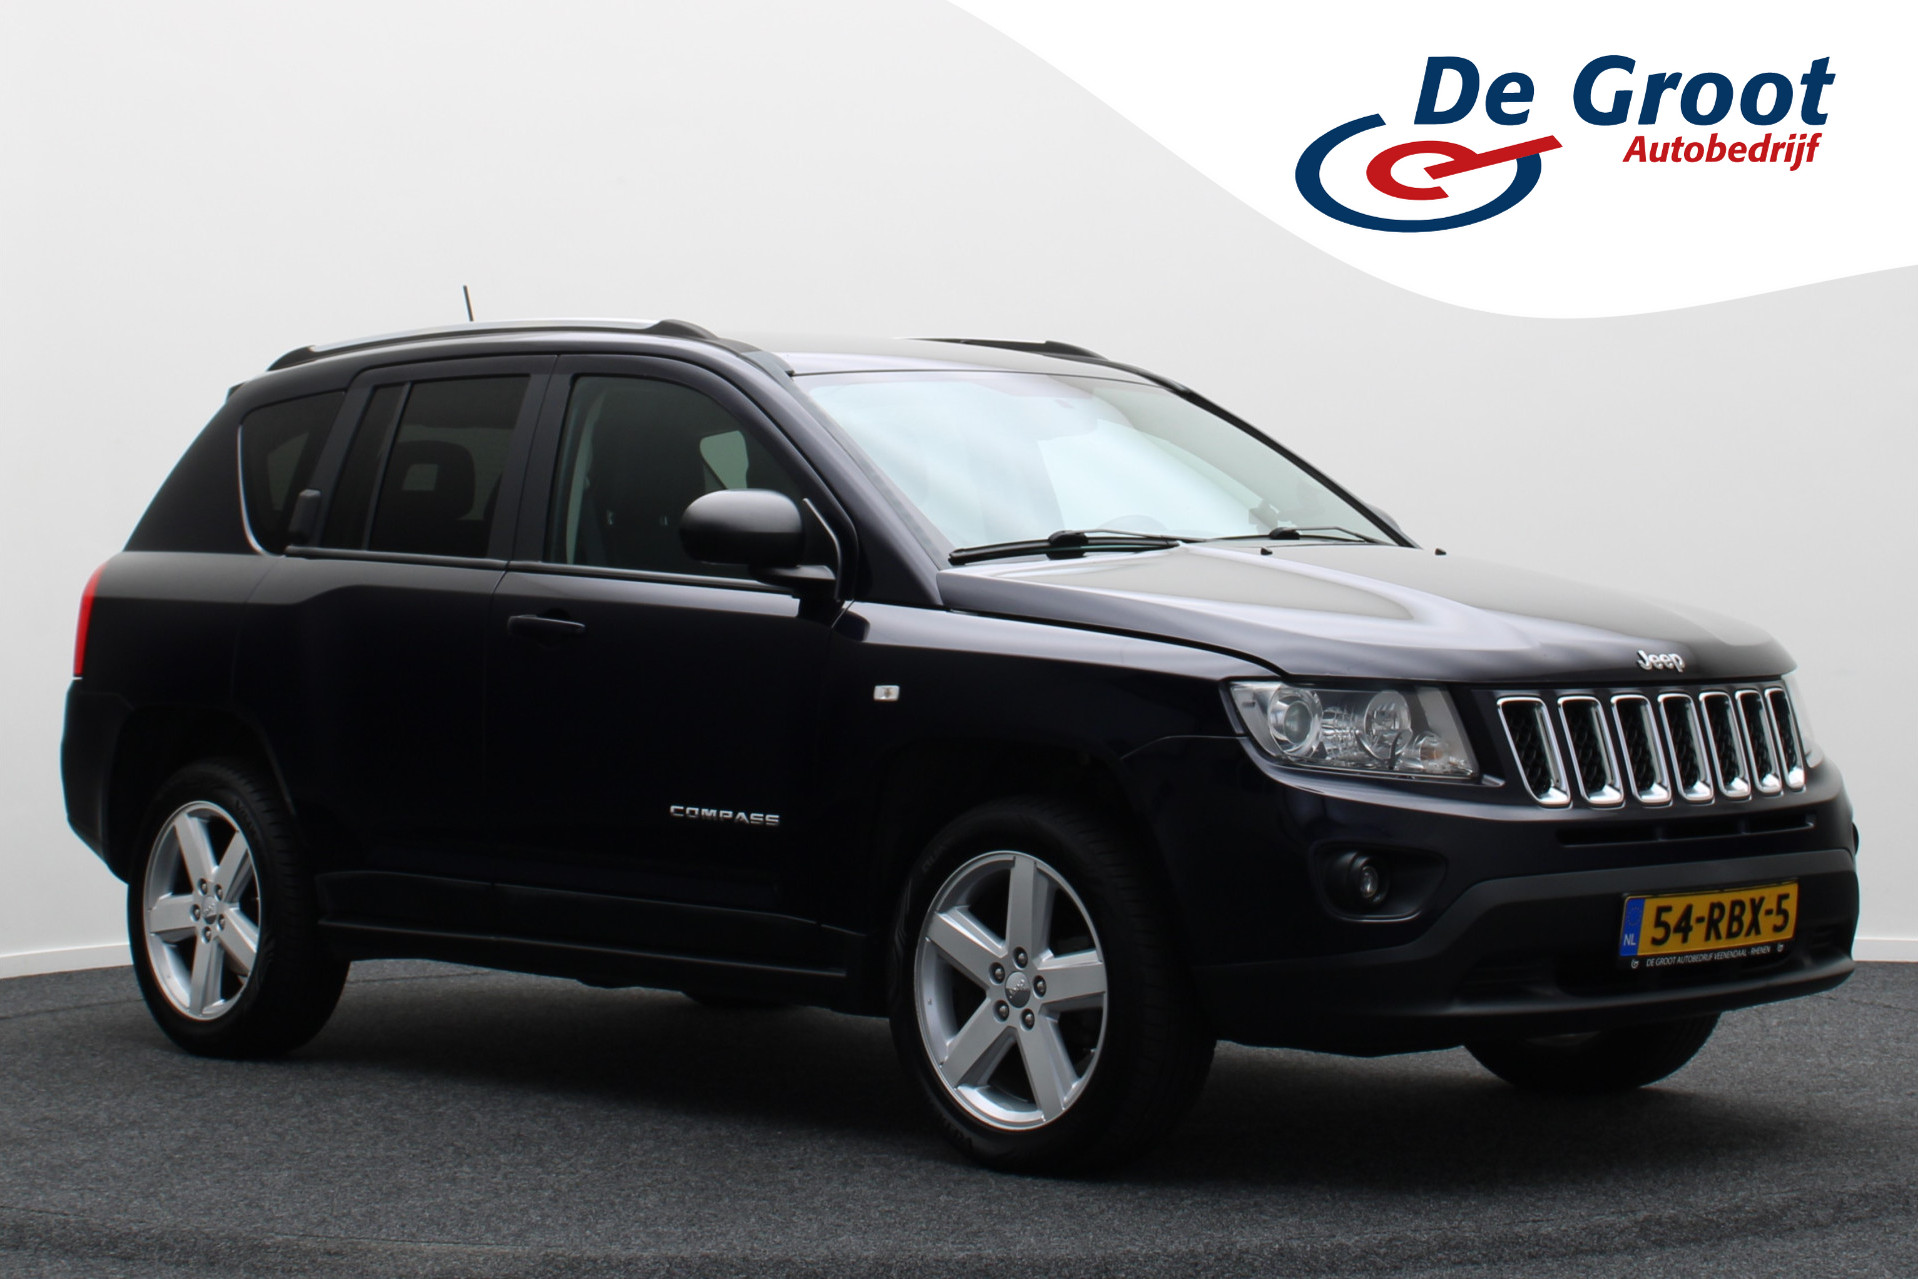 Jeep Compass 2.4 Limited 4WD Automaat Leer, Stoelverw., Climate, Cruise, Navigatie, Bluetooth, 18'' bij viaBOVAG.nl